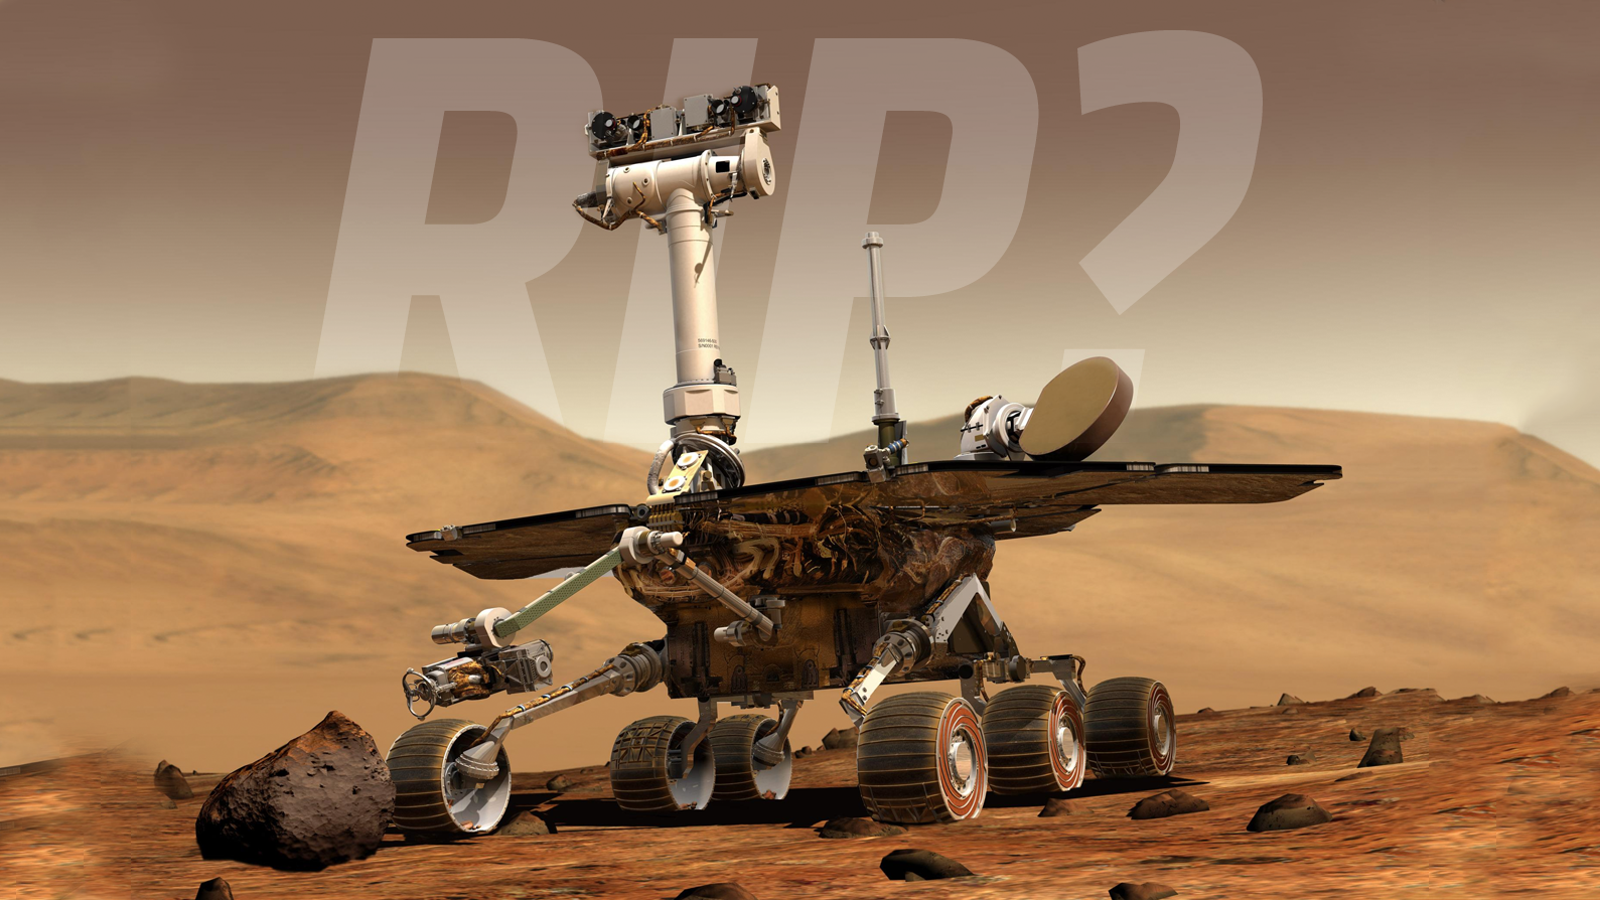 The Plucky Opportunity Rover May Finally Have Died on the Cold, Red